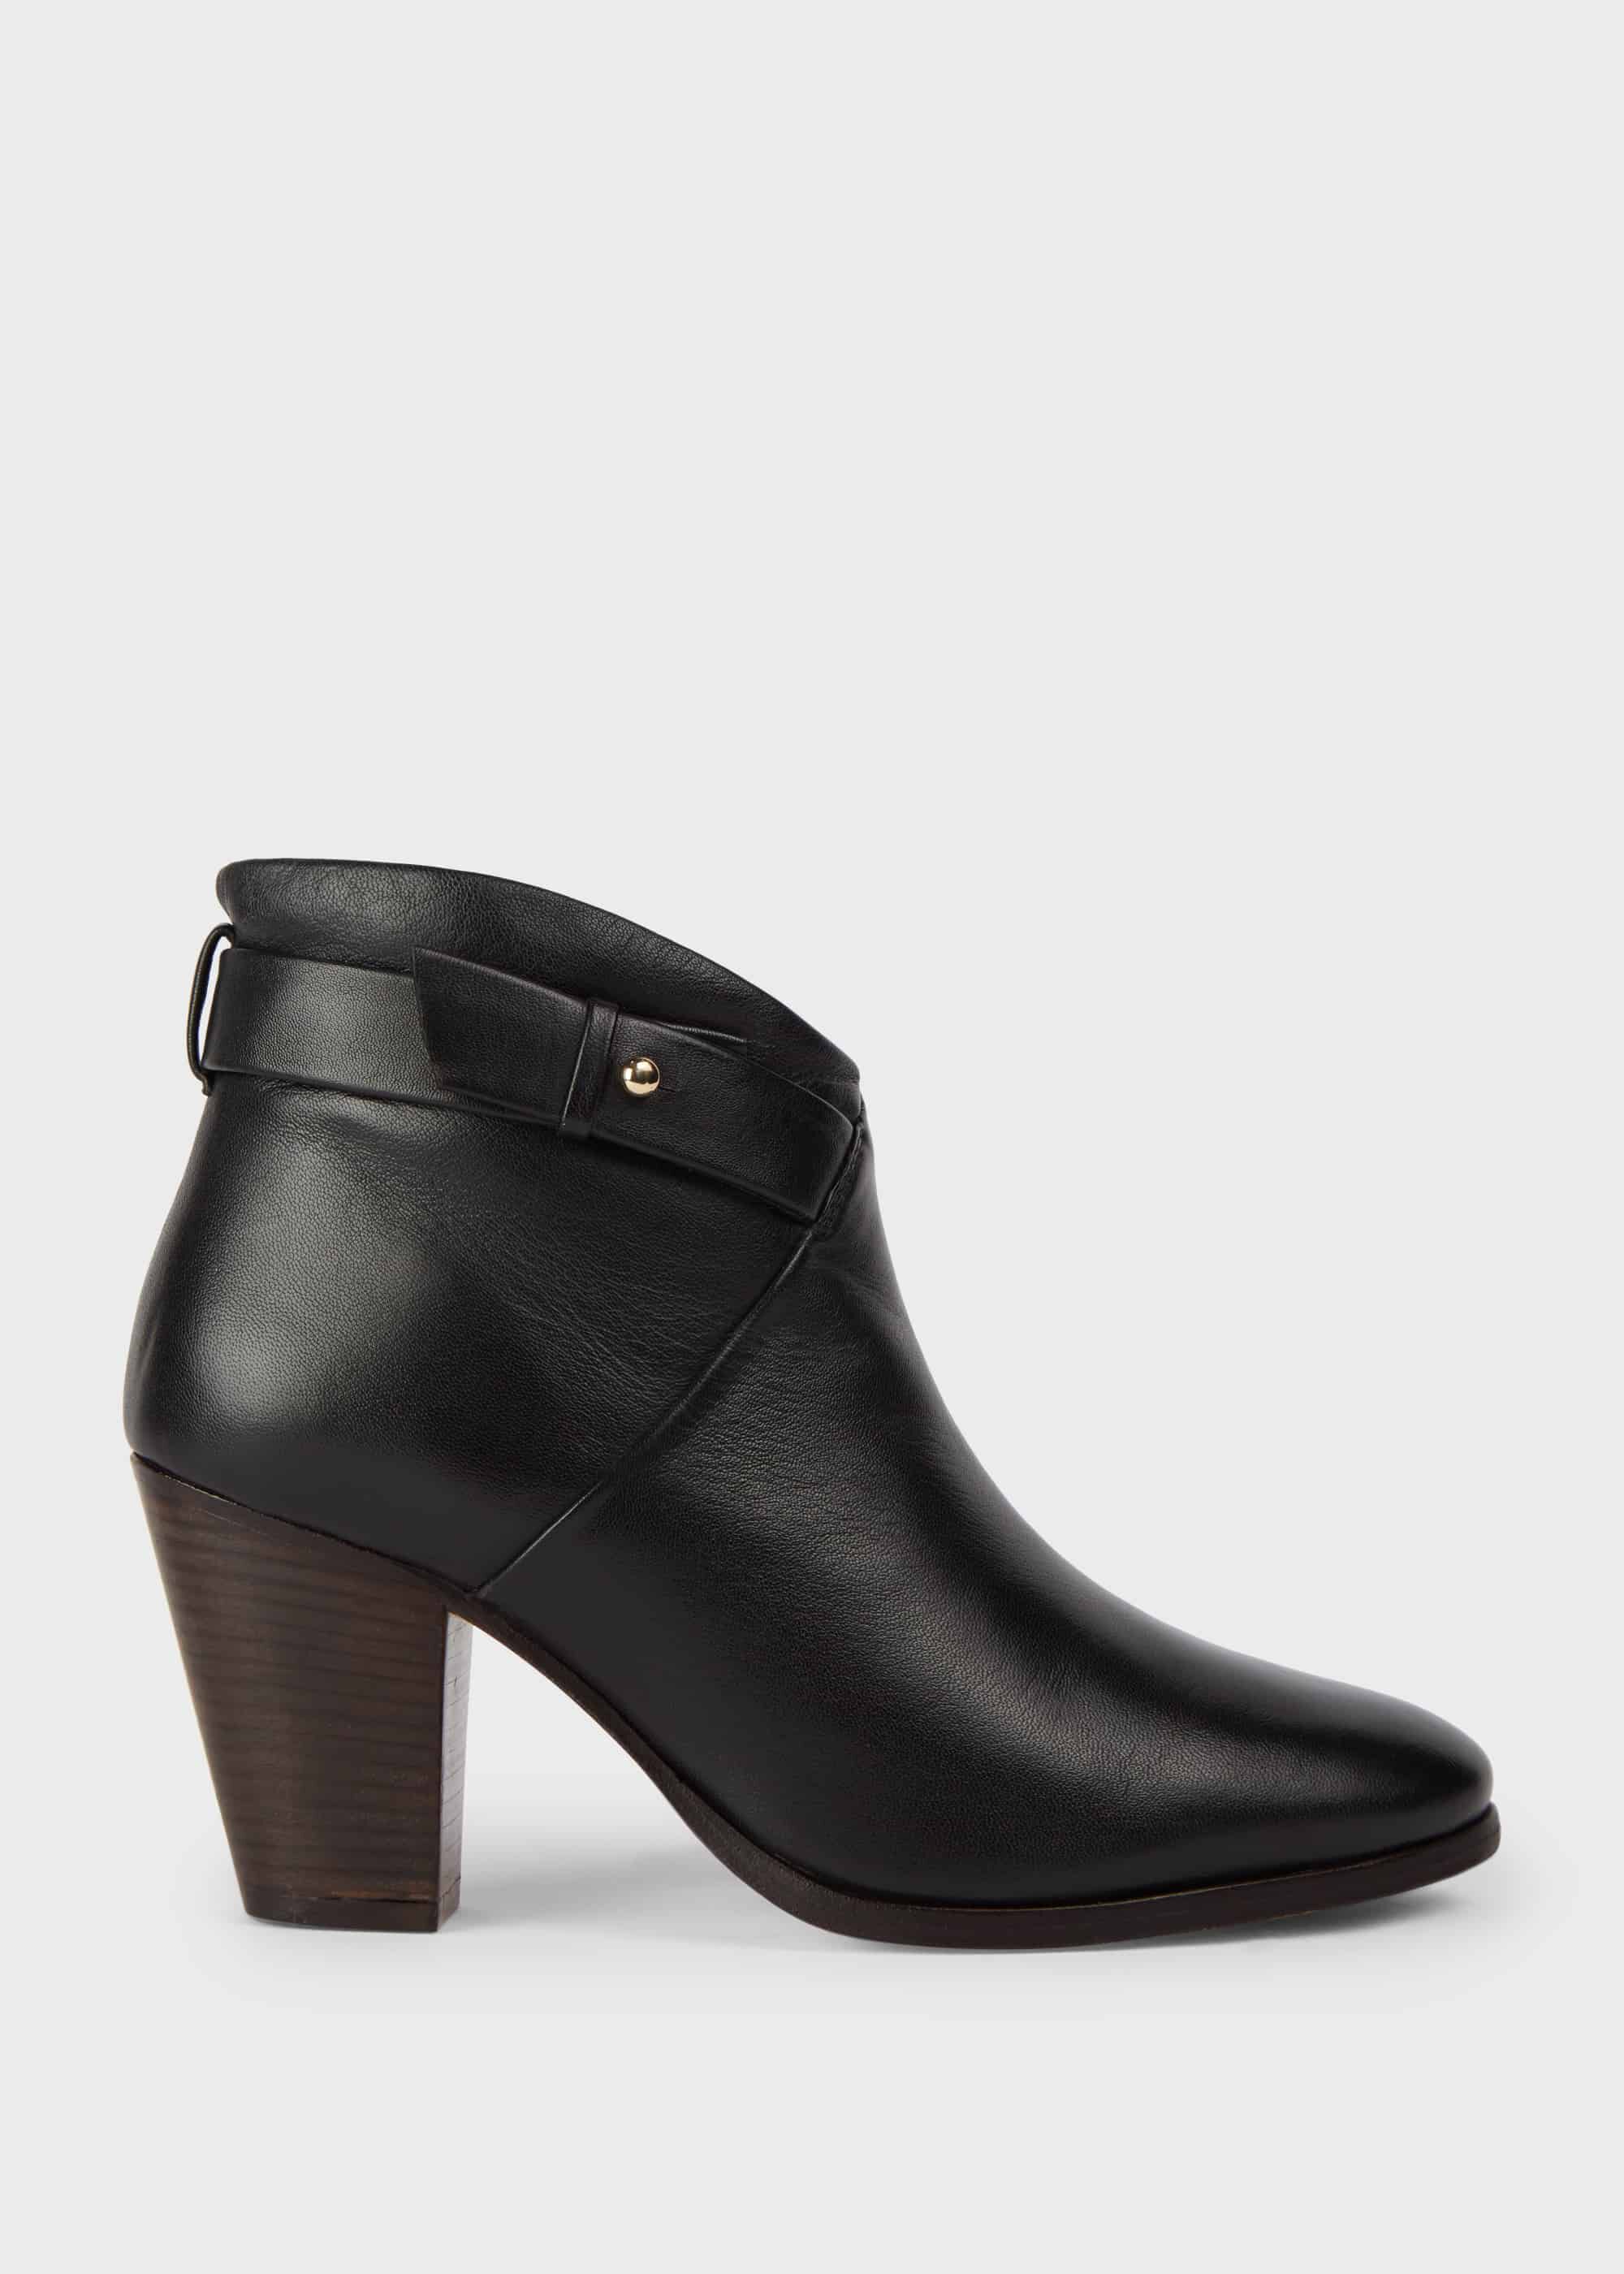 Ivy Leather Block Heel Ankle Boots | Hobbs